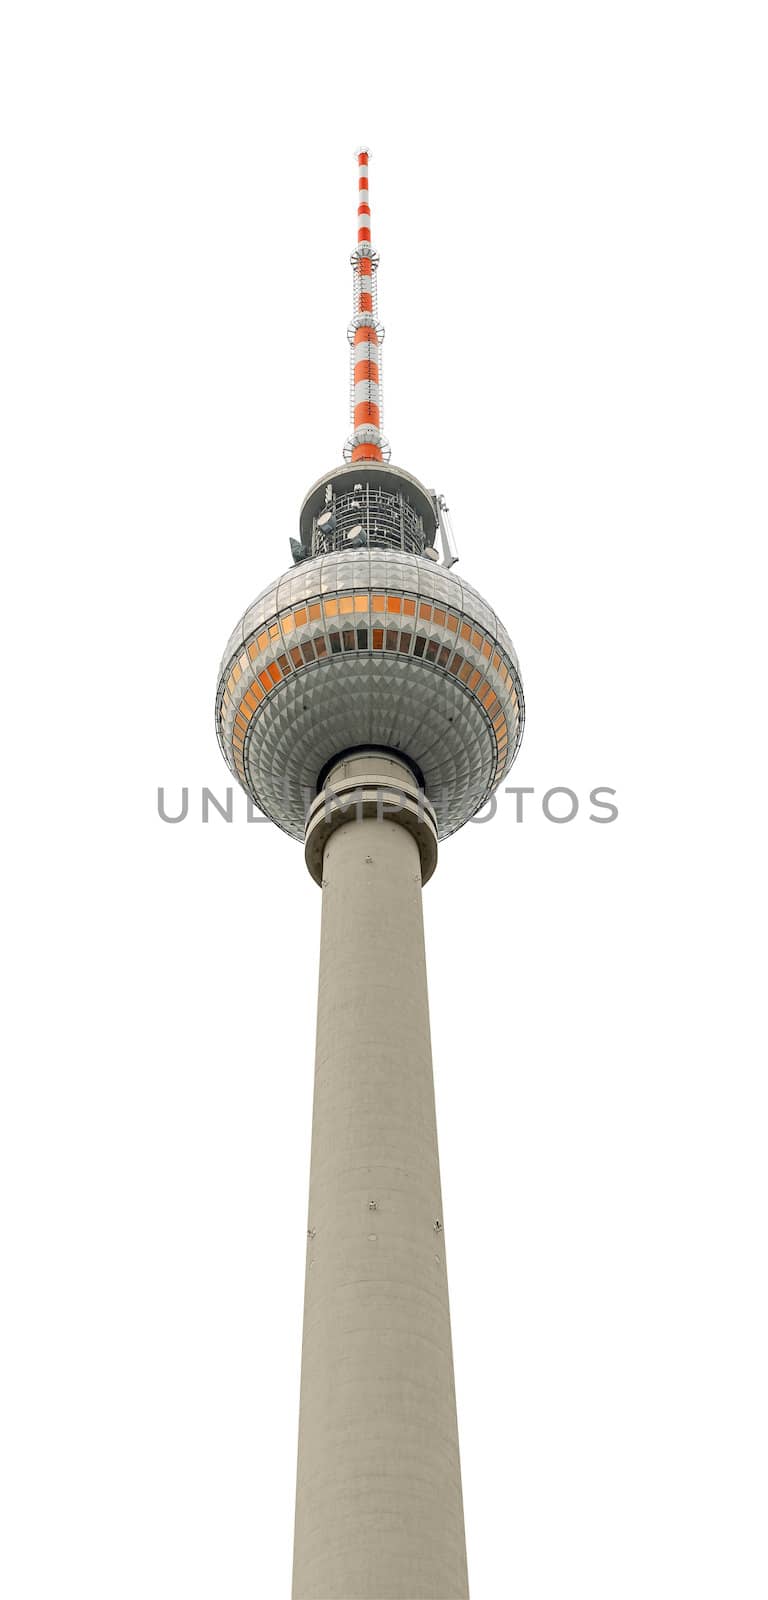 TV tower from Berlin. Isolated on white with path.